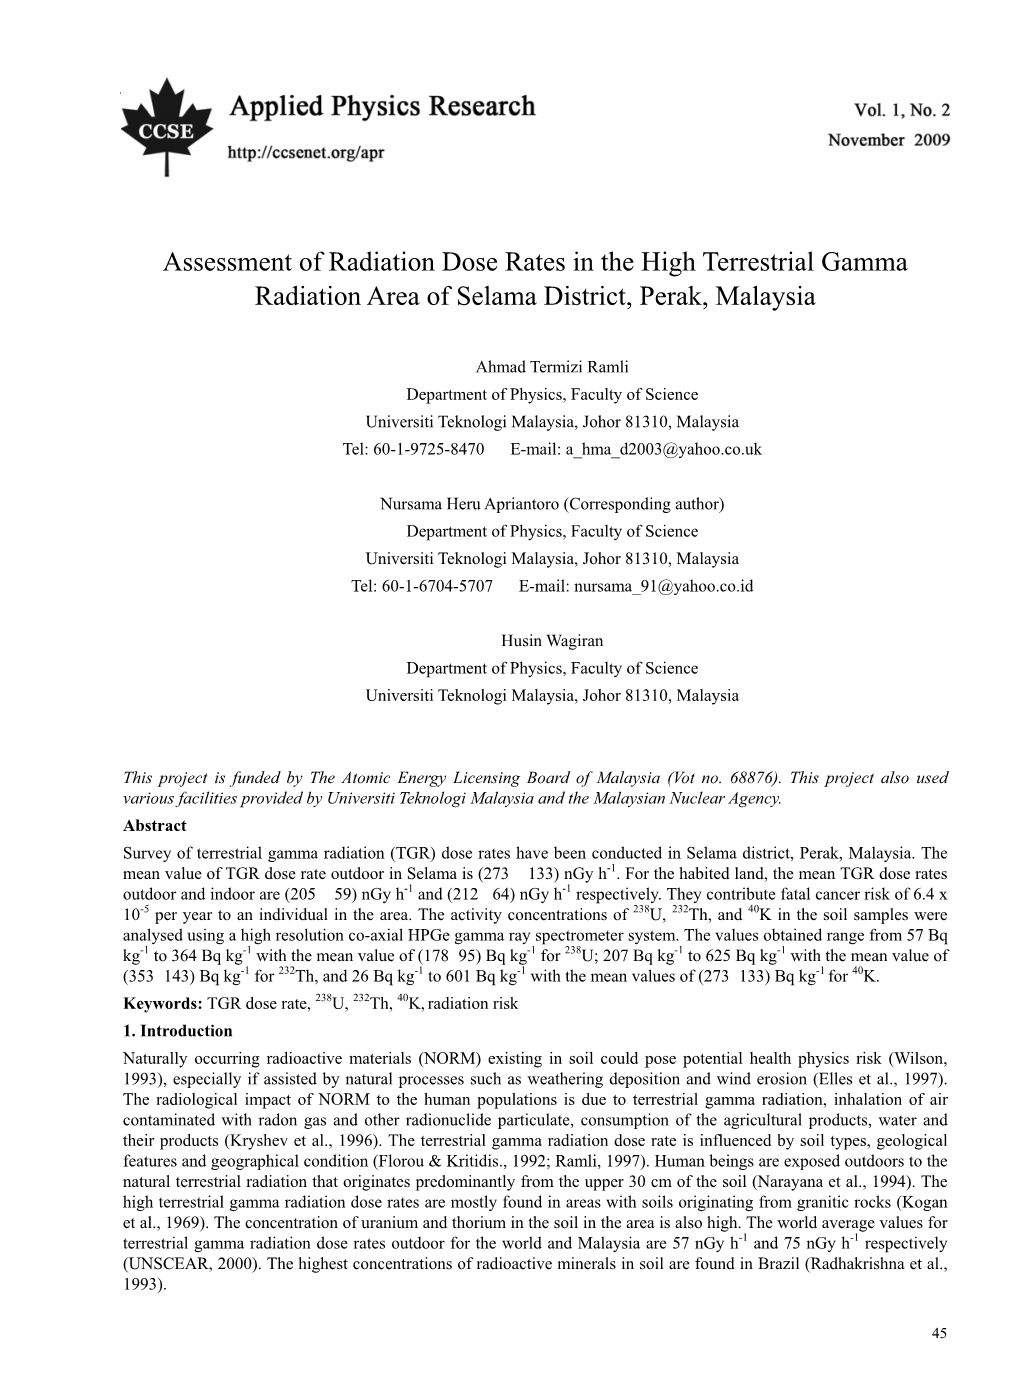 Assessment of Radiation Dose Rates in the High Terrestrial Gamma Radiation Area of Selama District, Perak, Malaysia